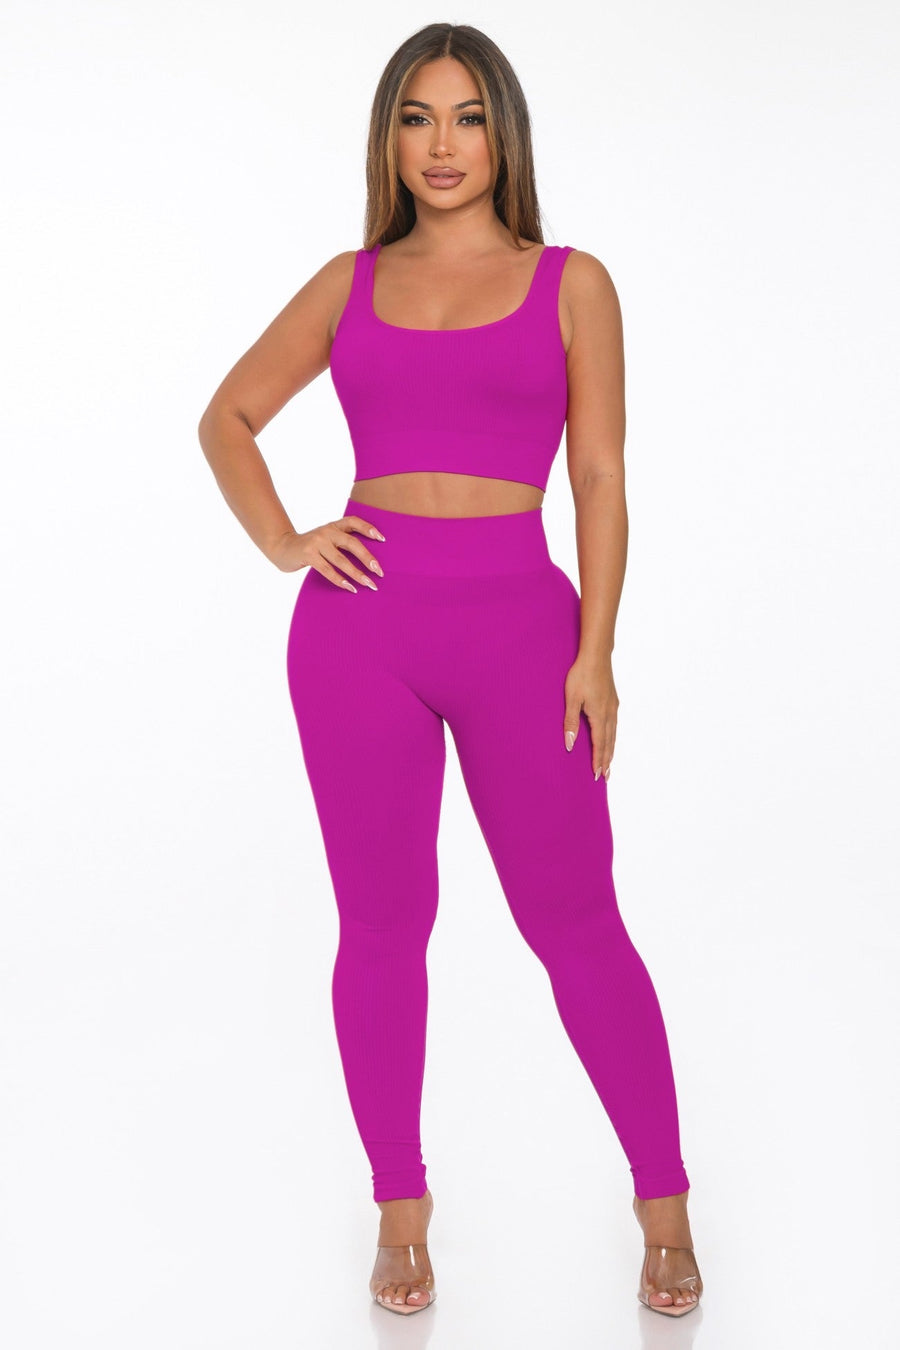 Everyday Seamless Set - The Active Avenue